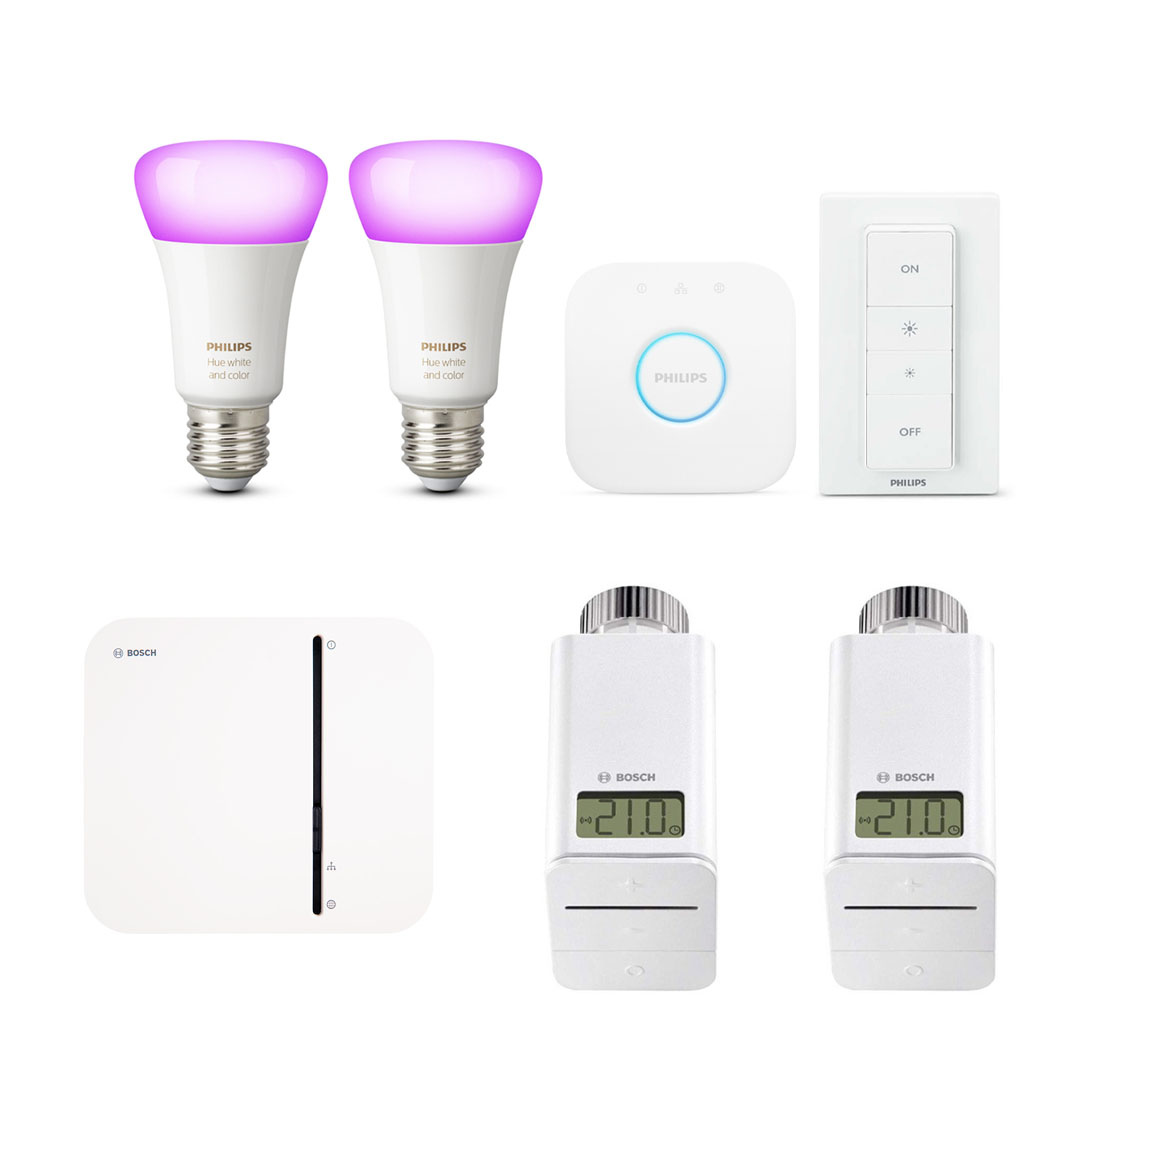 Bosch Smart Home Controller + 2x Radiatorknop + Philips Hue White & Color E27 Bluetooth Kit